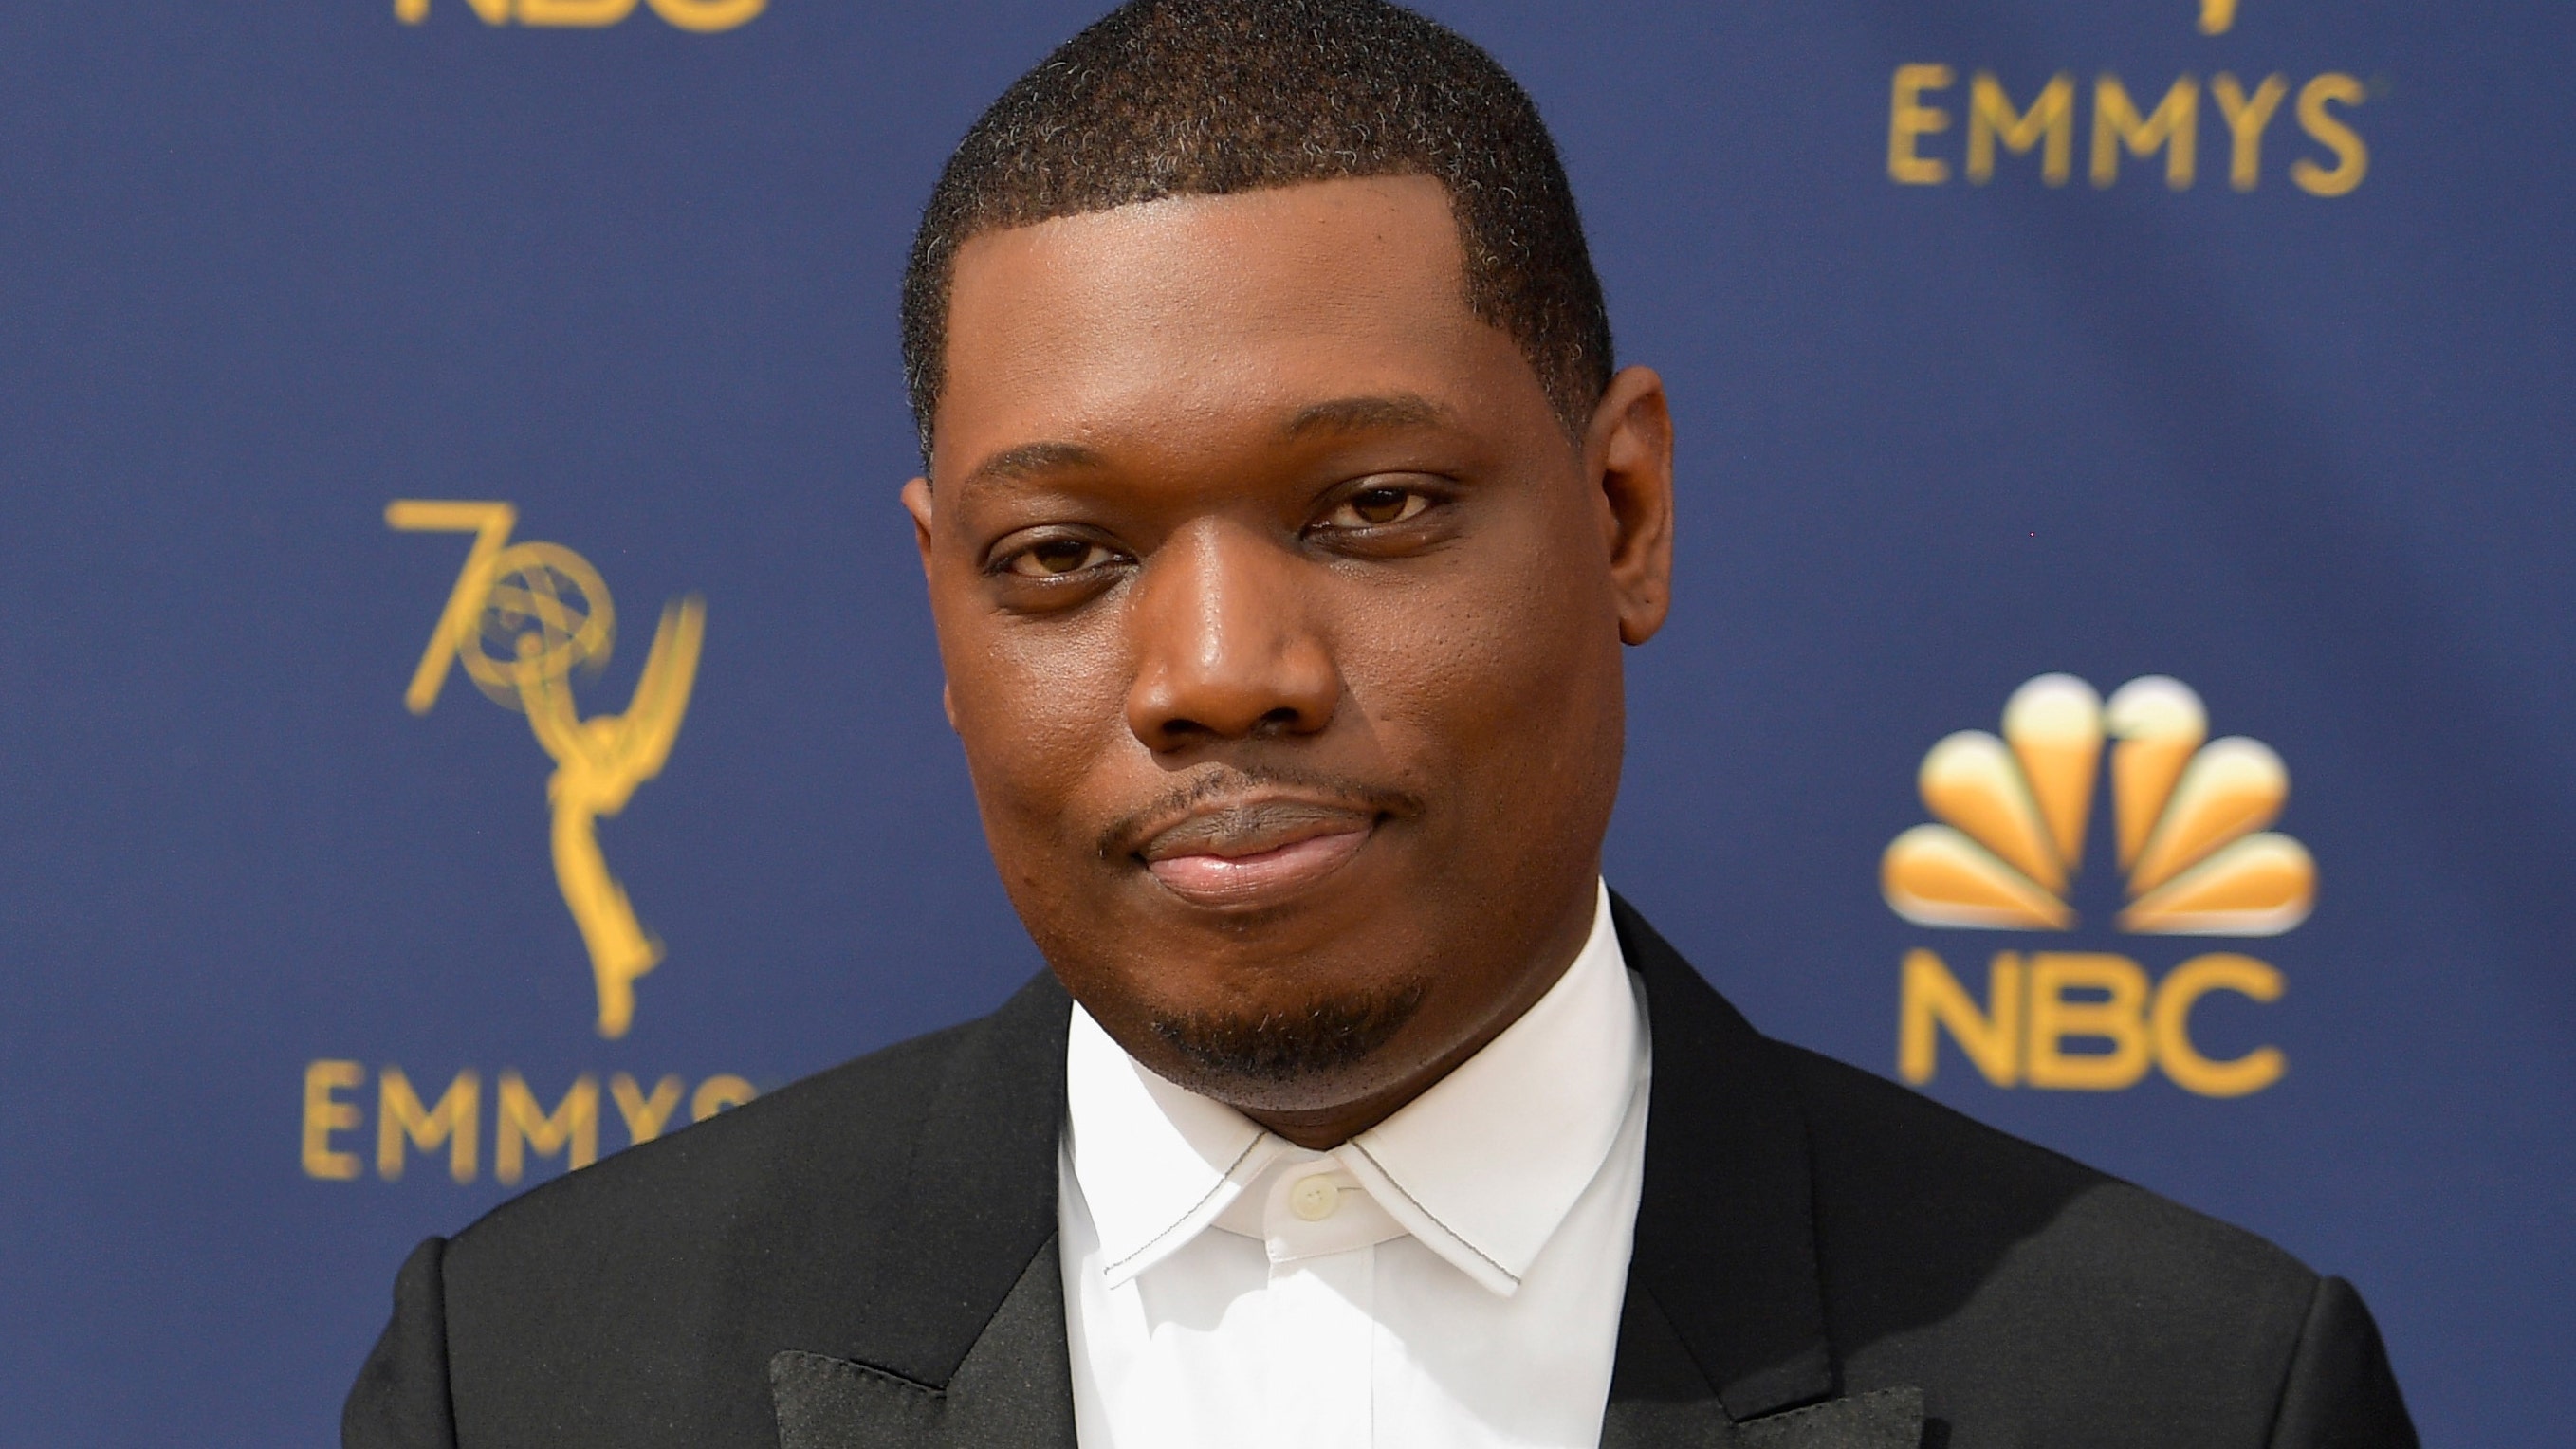 ‘Saturday Night Live’ star Michael Che faces negative reaction because of the ‘Weekend Update’ joke, considered anti-Semitic